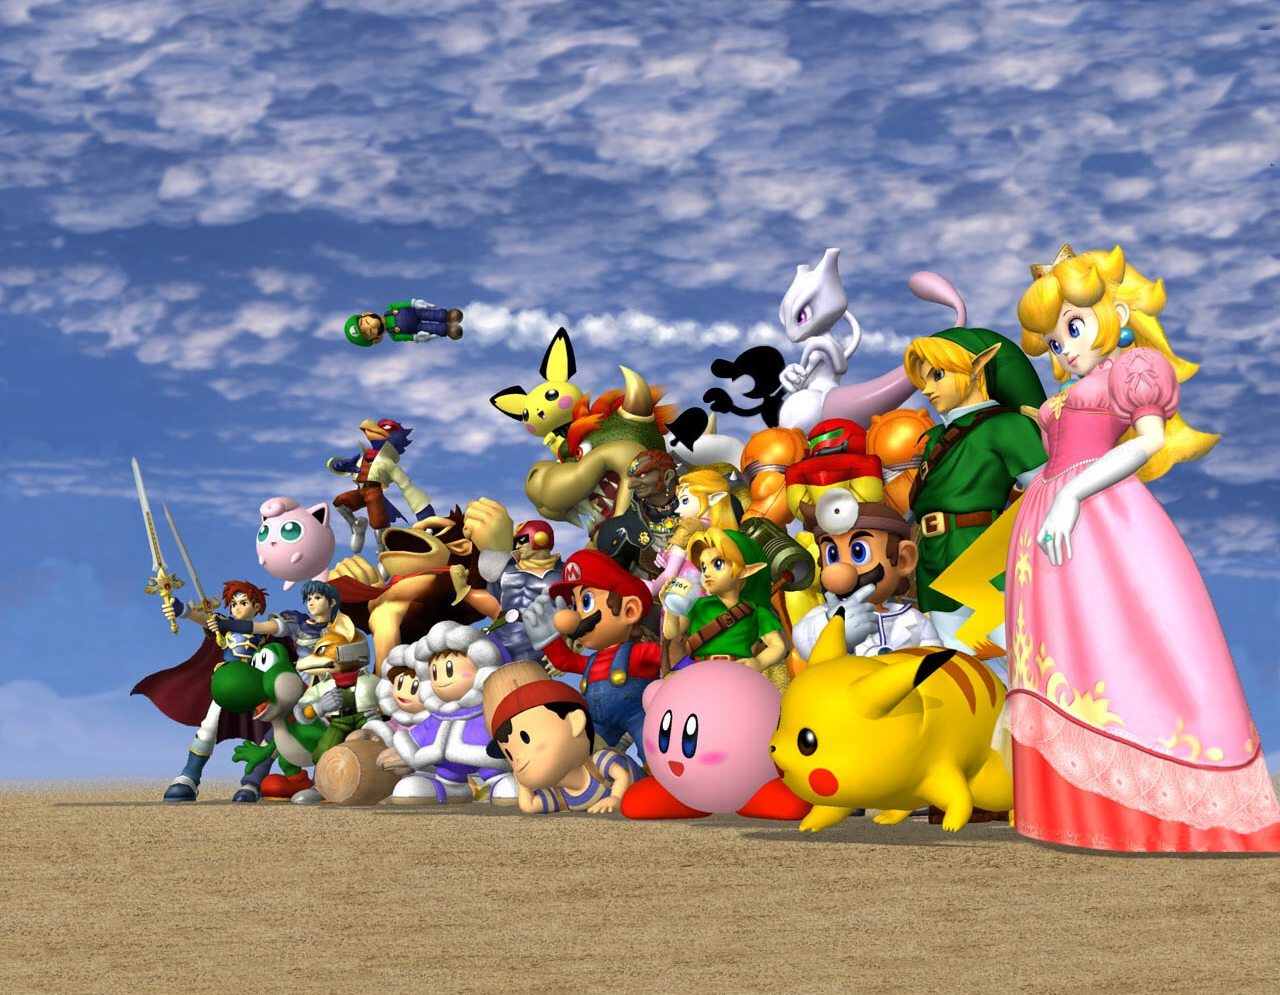 The entire cast of Super Smash Bros. Melee.